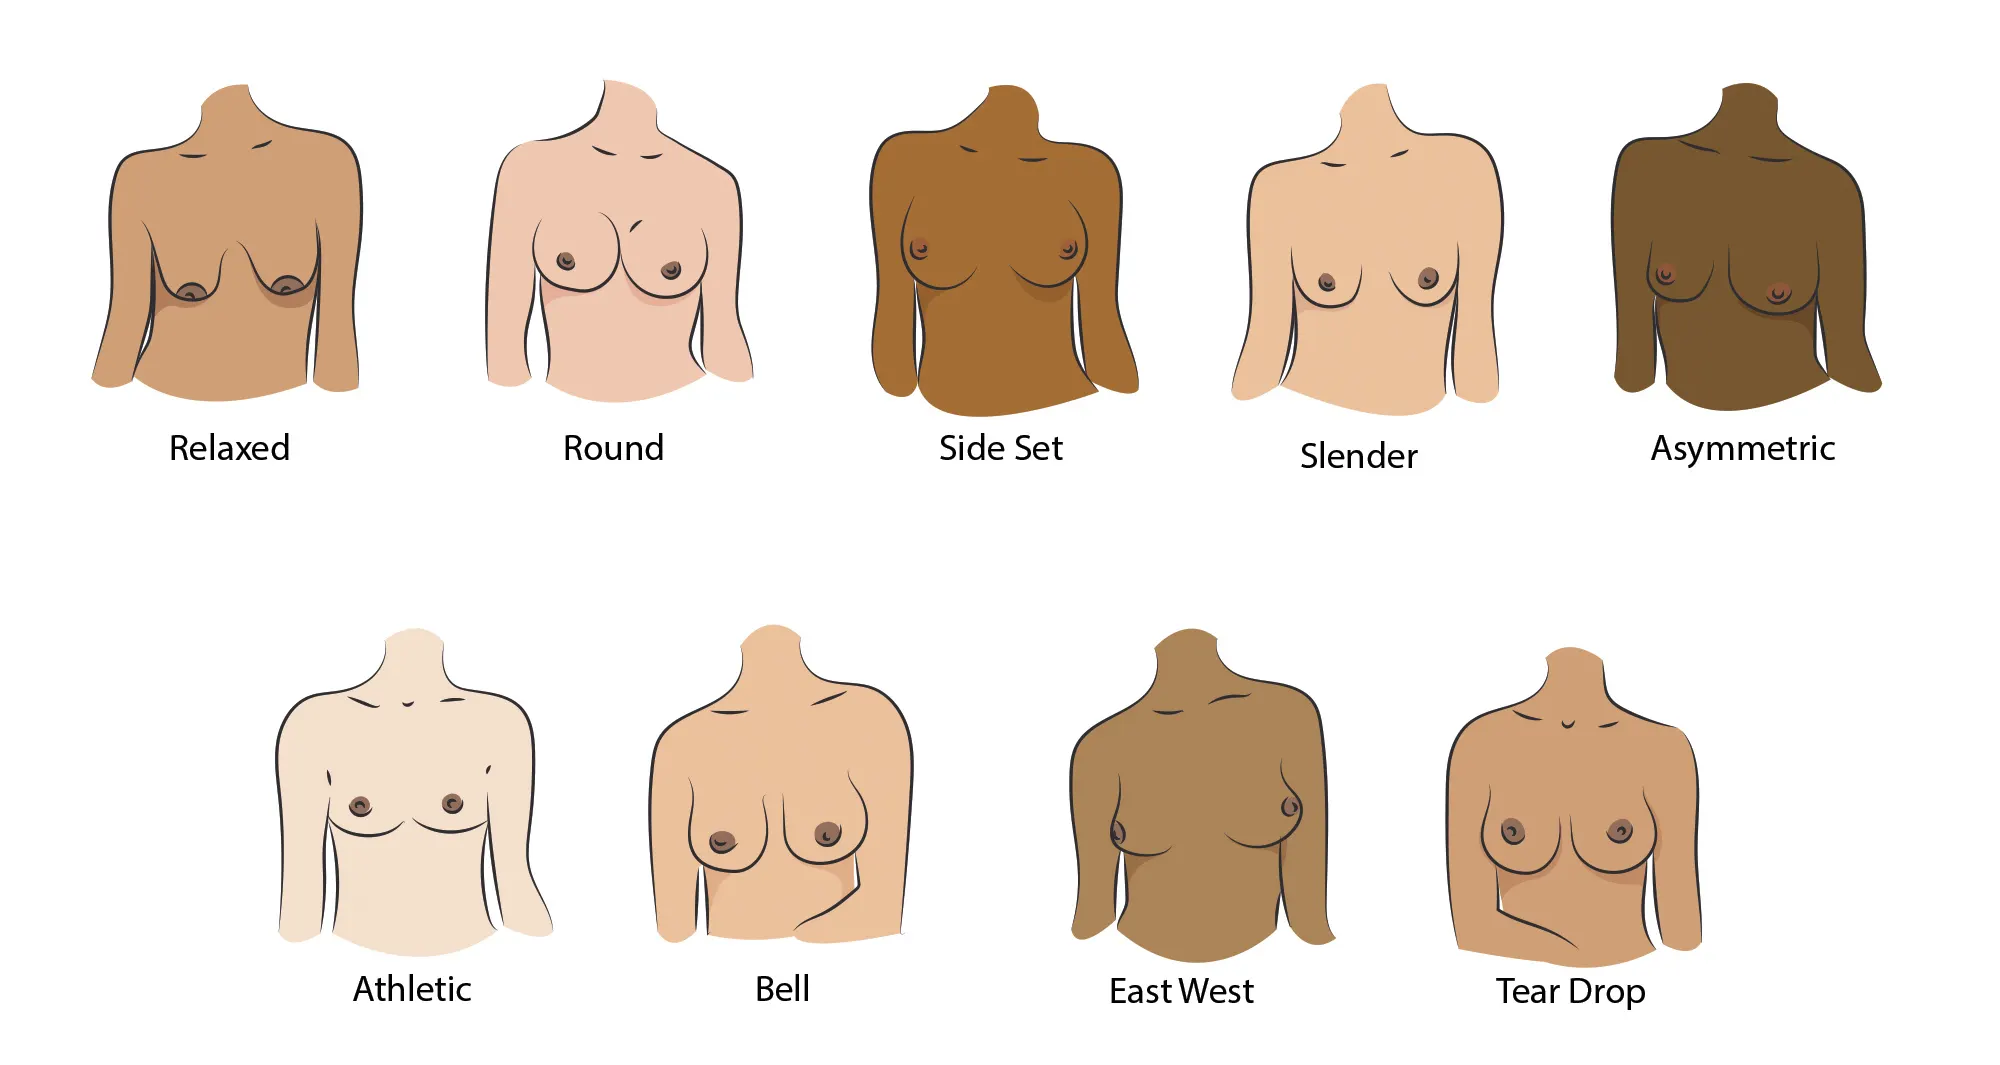  infographic depicting different breasts shapes